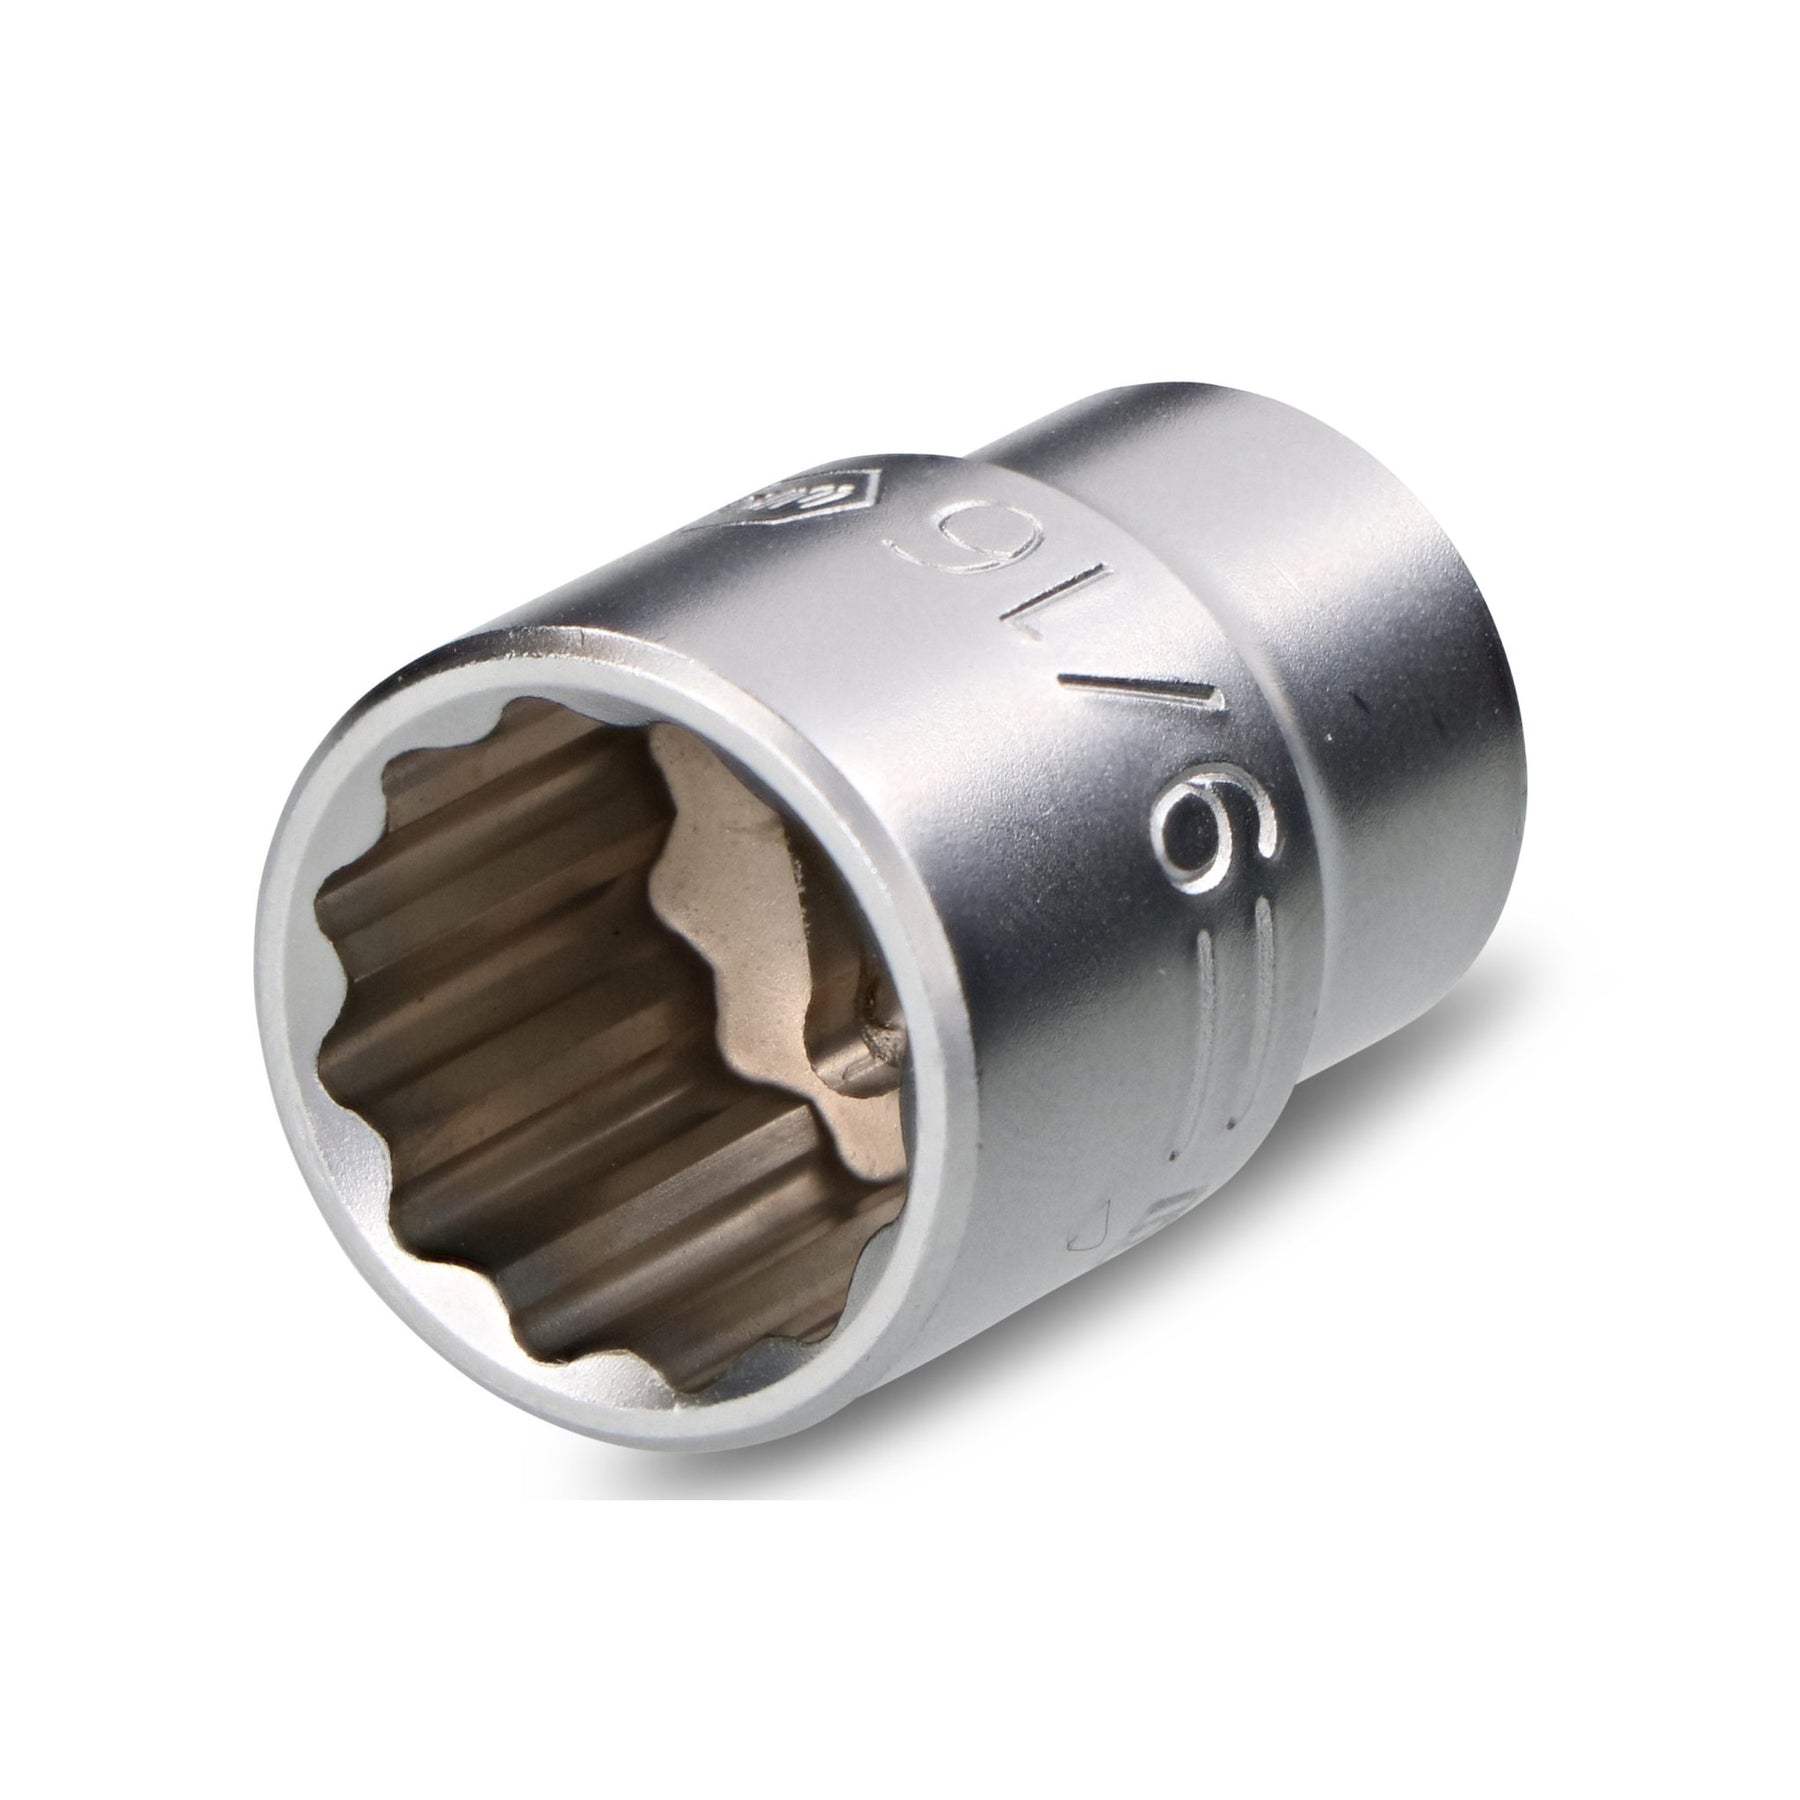 12 Point - 3/8 Inch Drive Socket - 9/16"